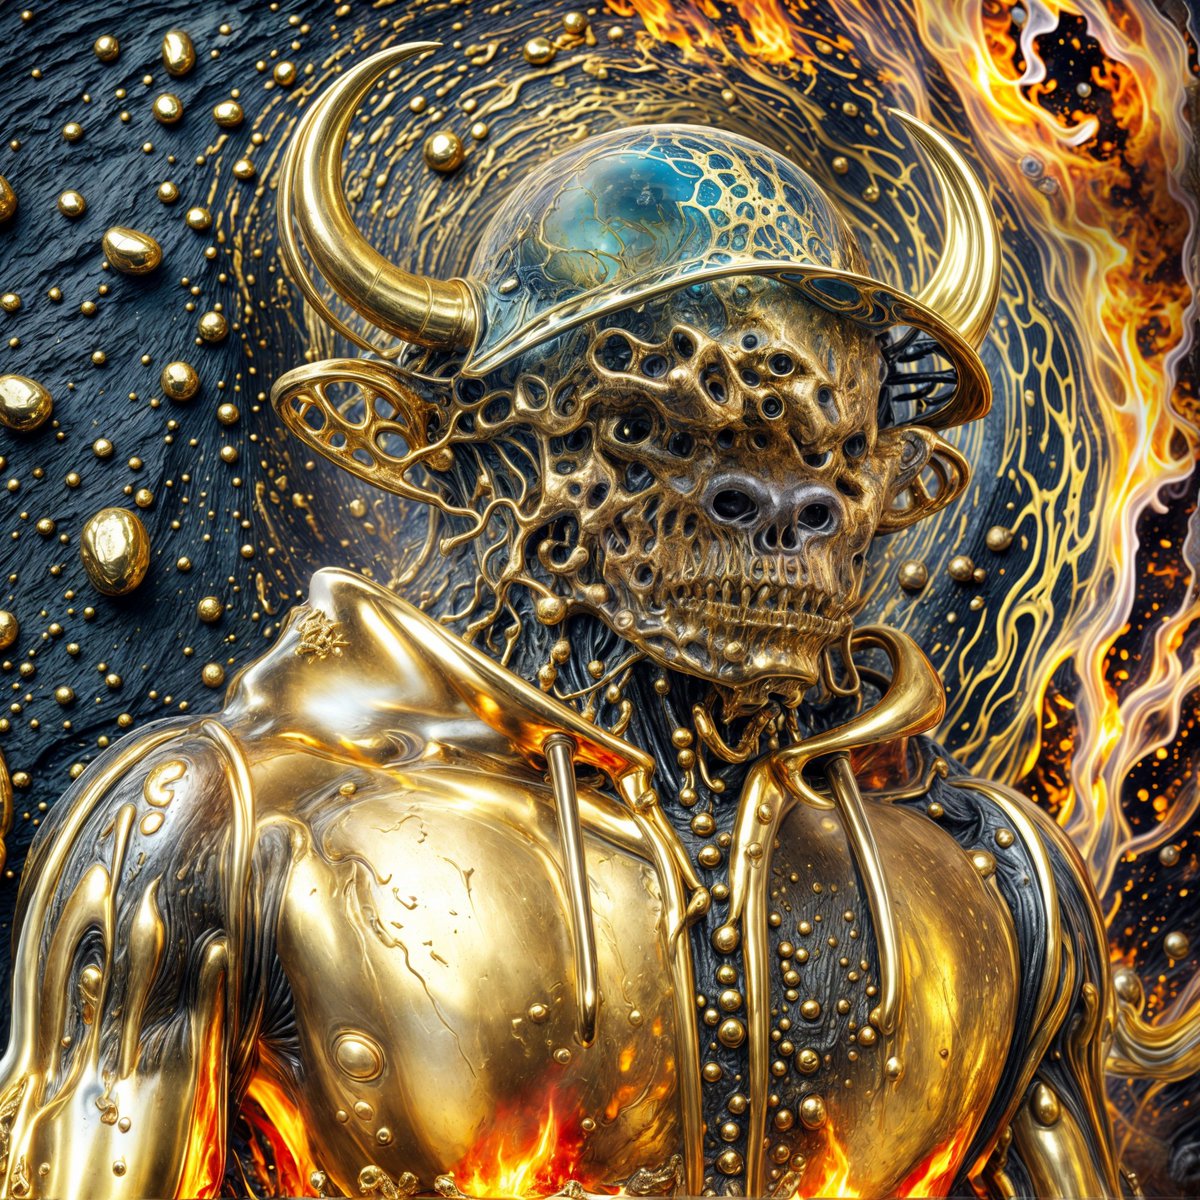 Just got another @bearandbullnft Eternal Key done by @AiAnarchist I call this one.... 'the golden child' Forged from the depths of Eternia, melted from the chaos rings of the elders, the golden child bleeds as he comes to life!! Fckn EPIC! 🔥🥵 #YUGE #BBNFT